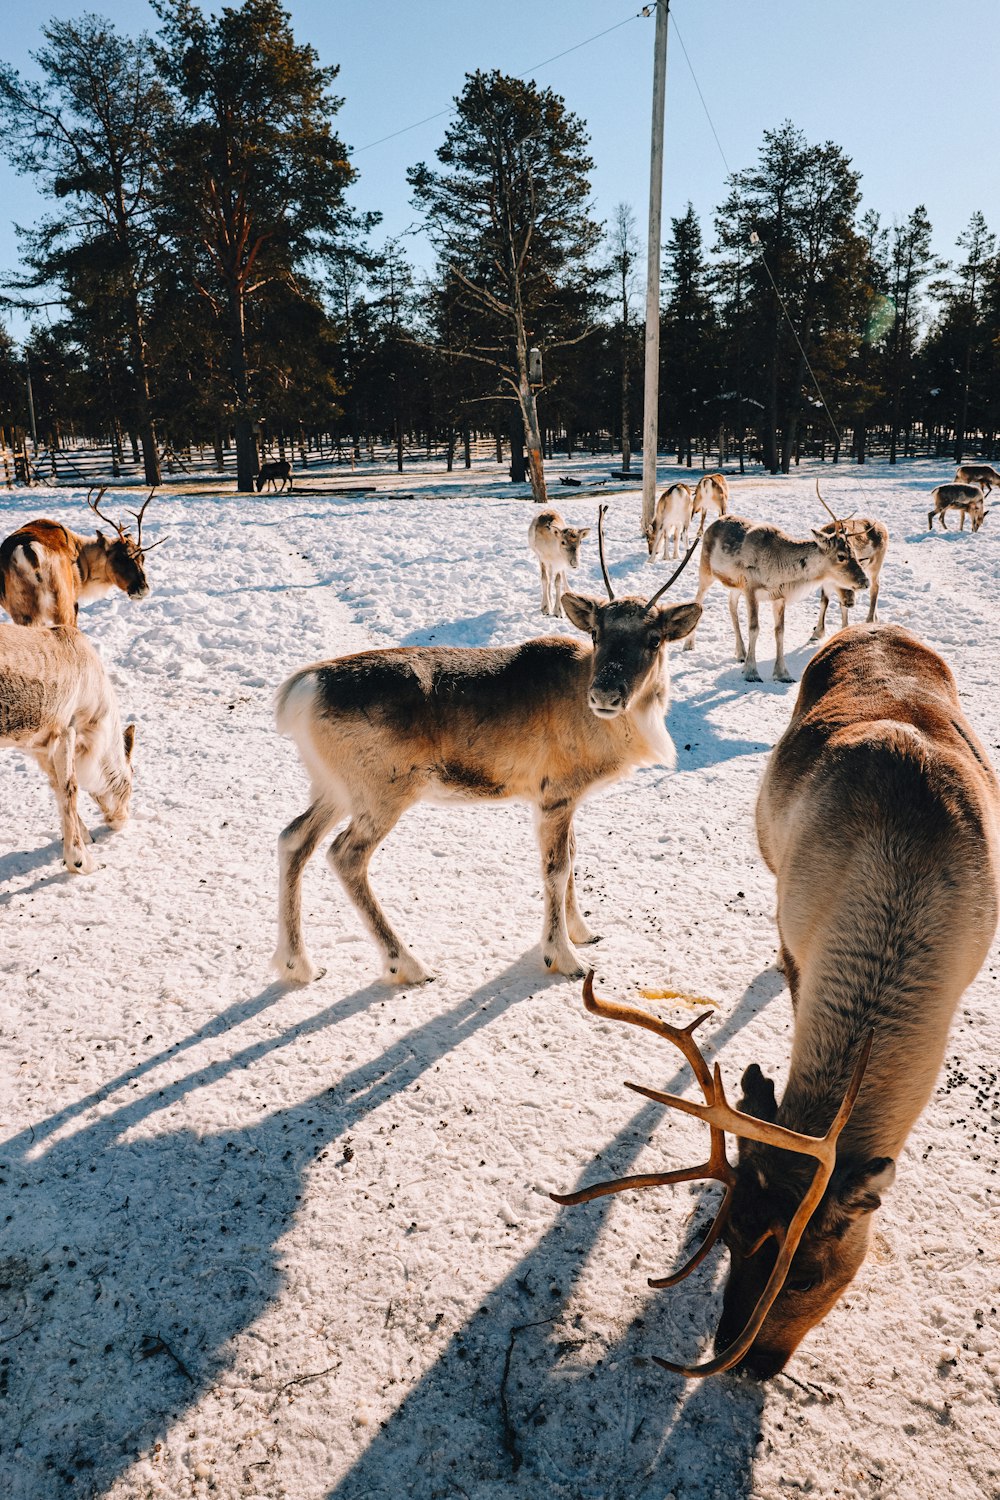 a herd of reindeer standing on top of a snow covered field